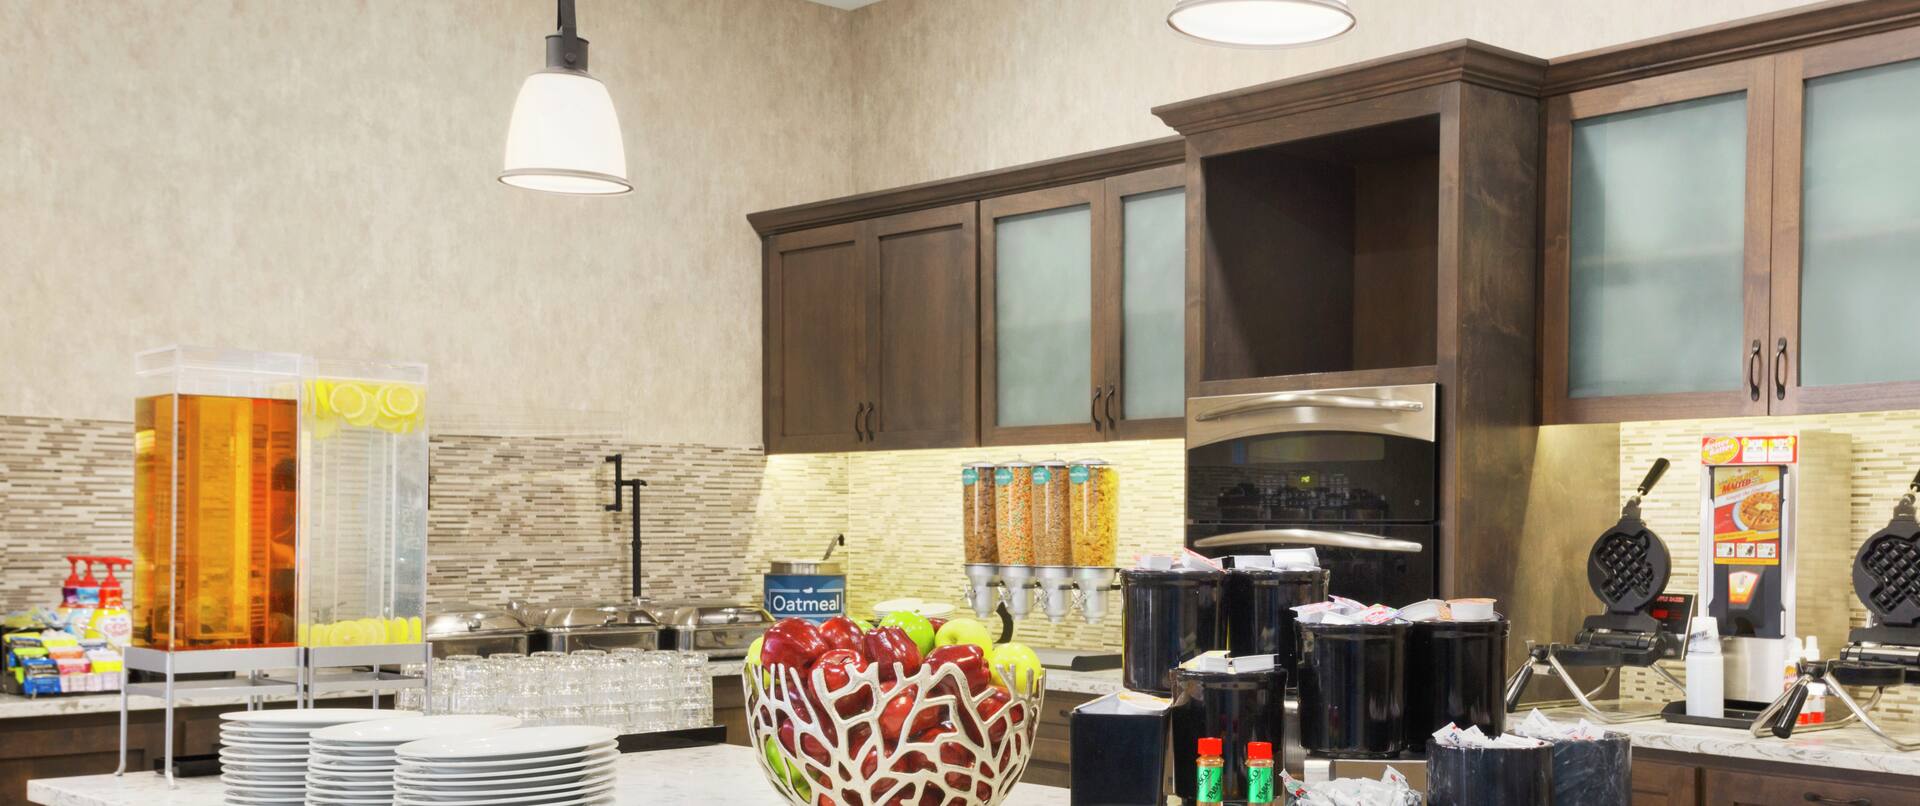 Breakfast Buffet Area with Wafflemakers